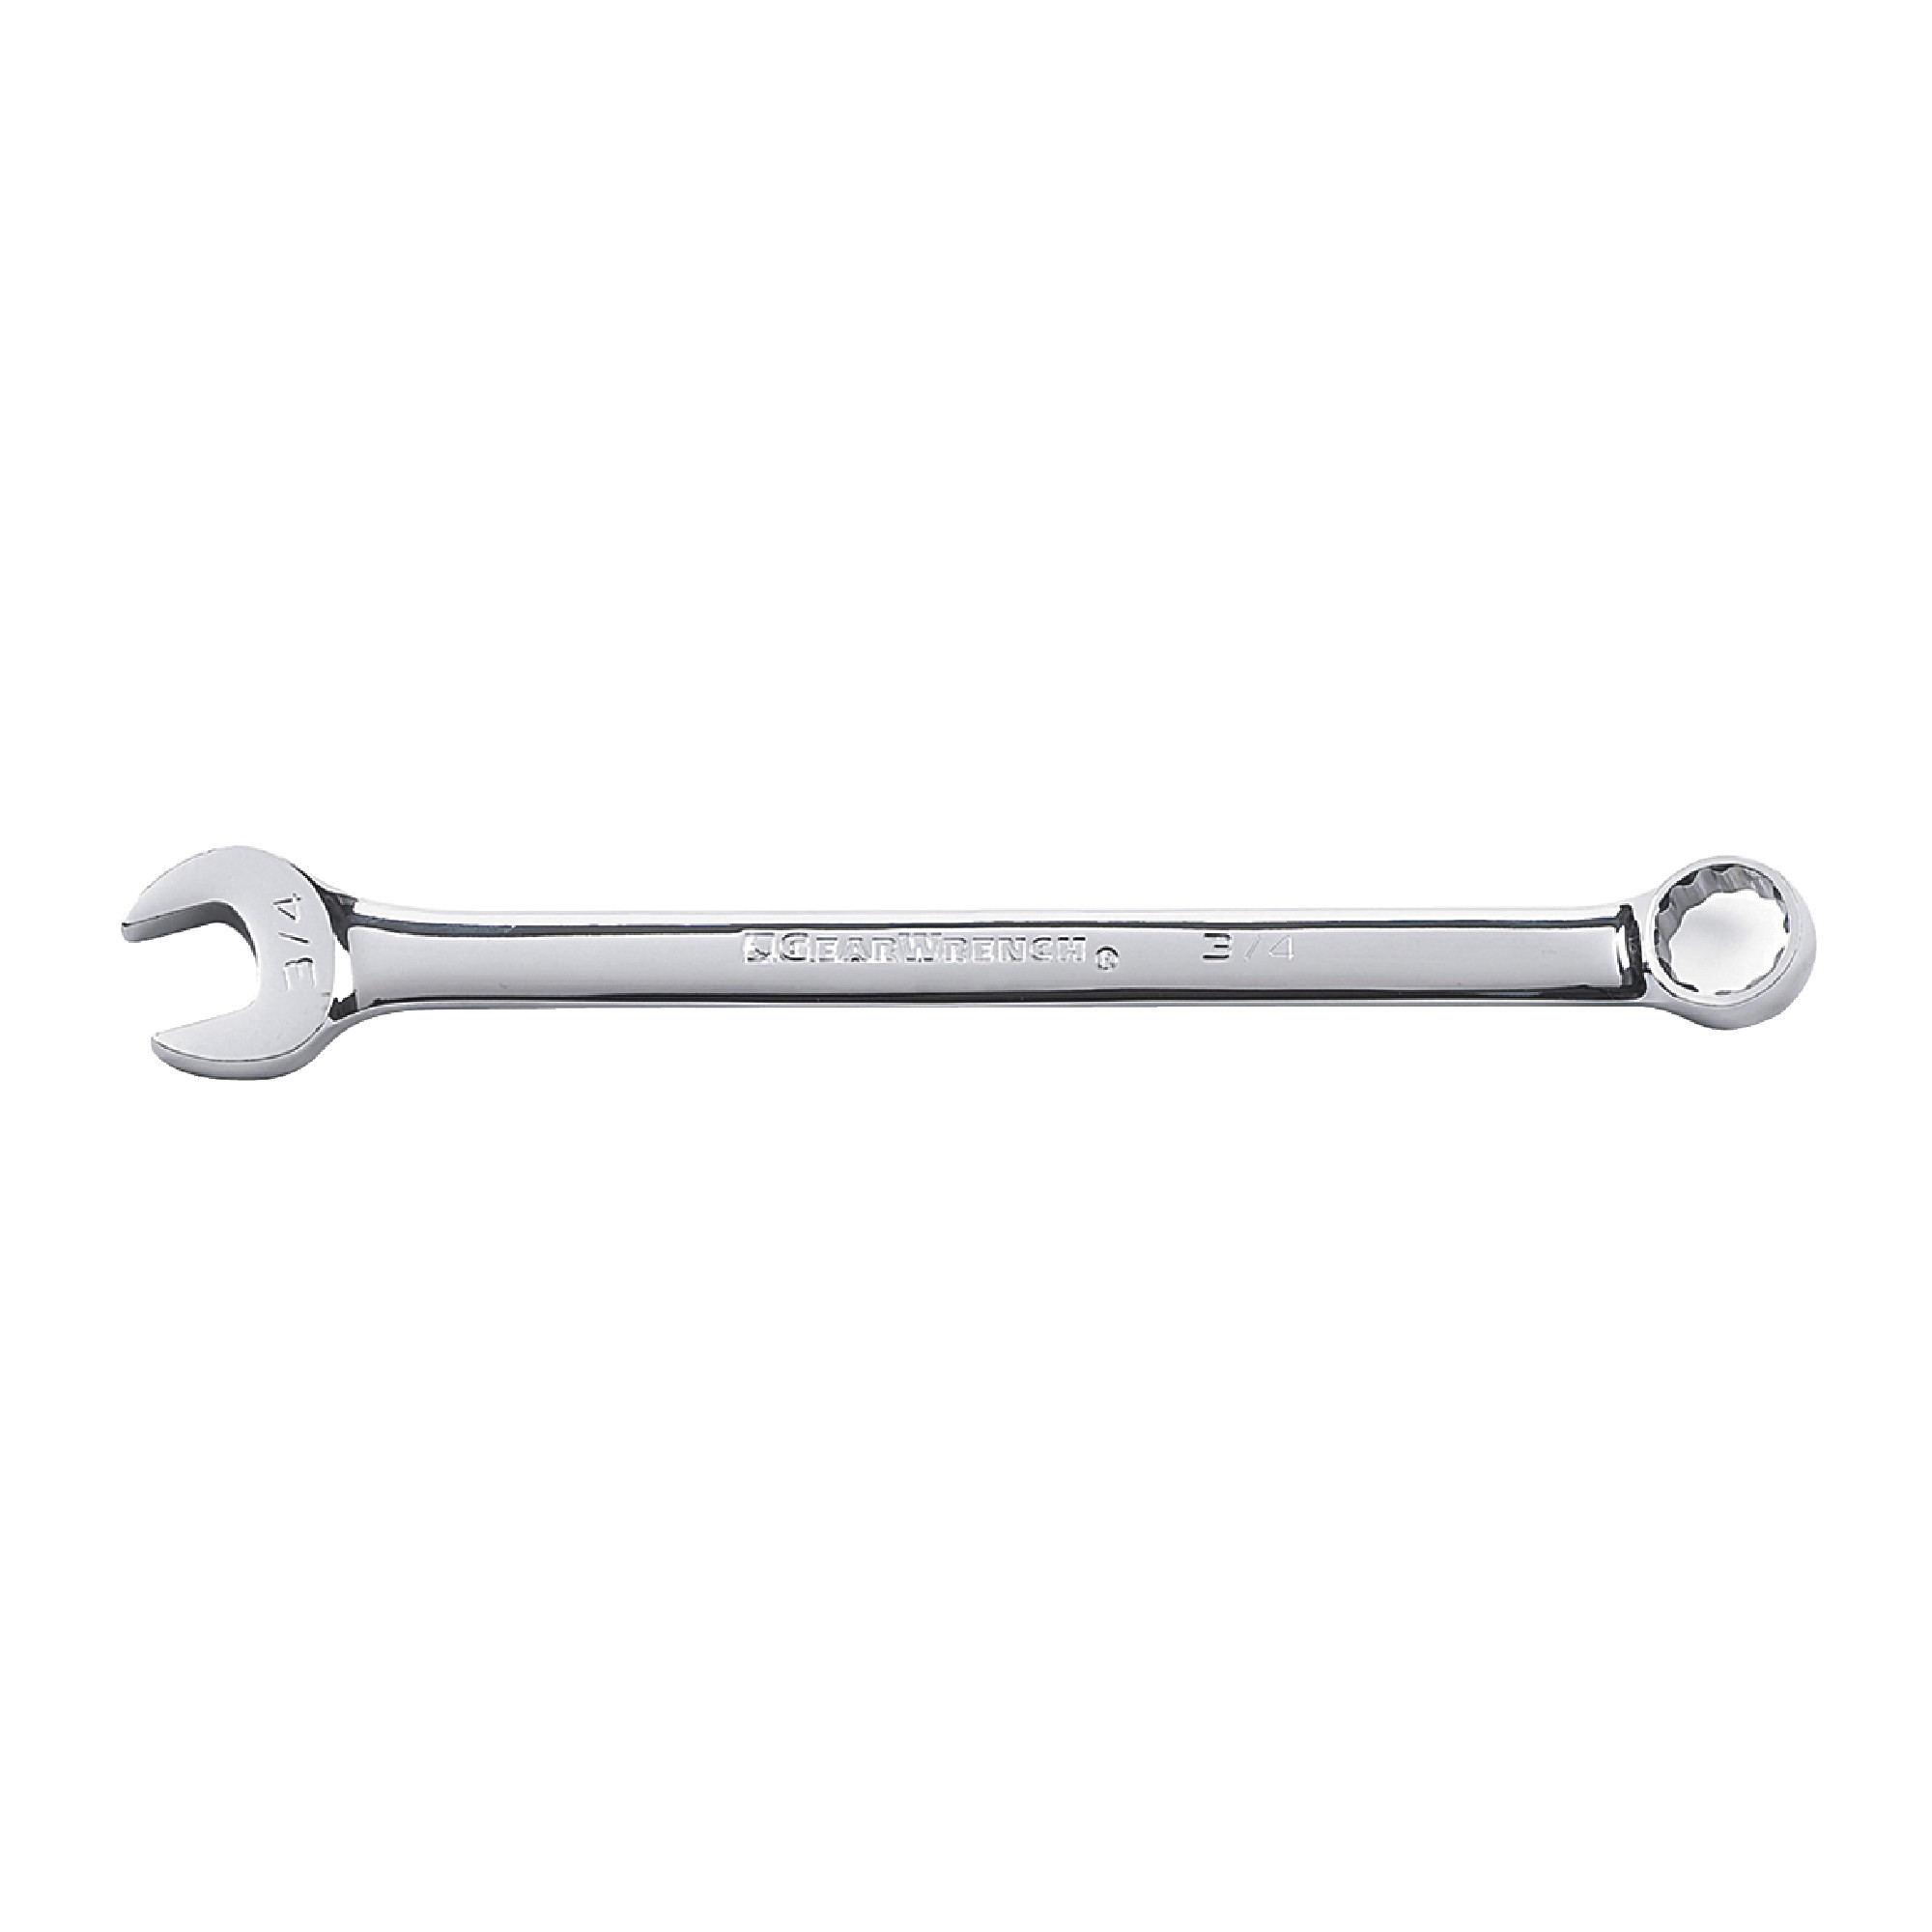 5/16" 12 Point Long Pattern Combination Wrench